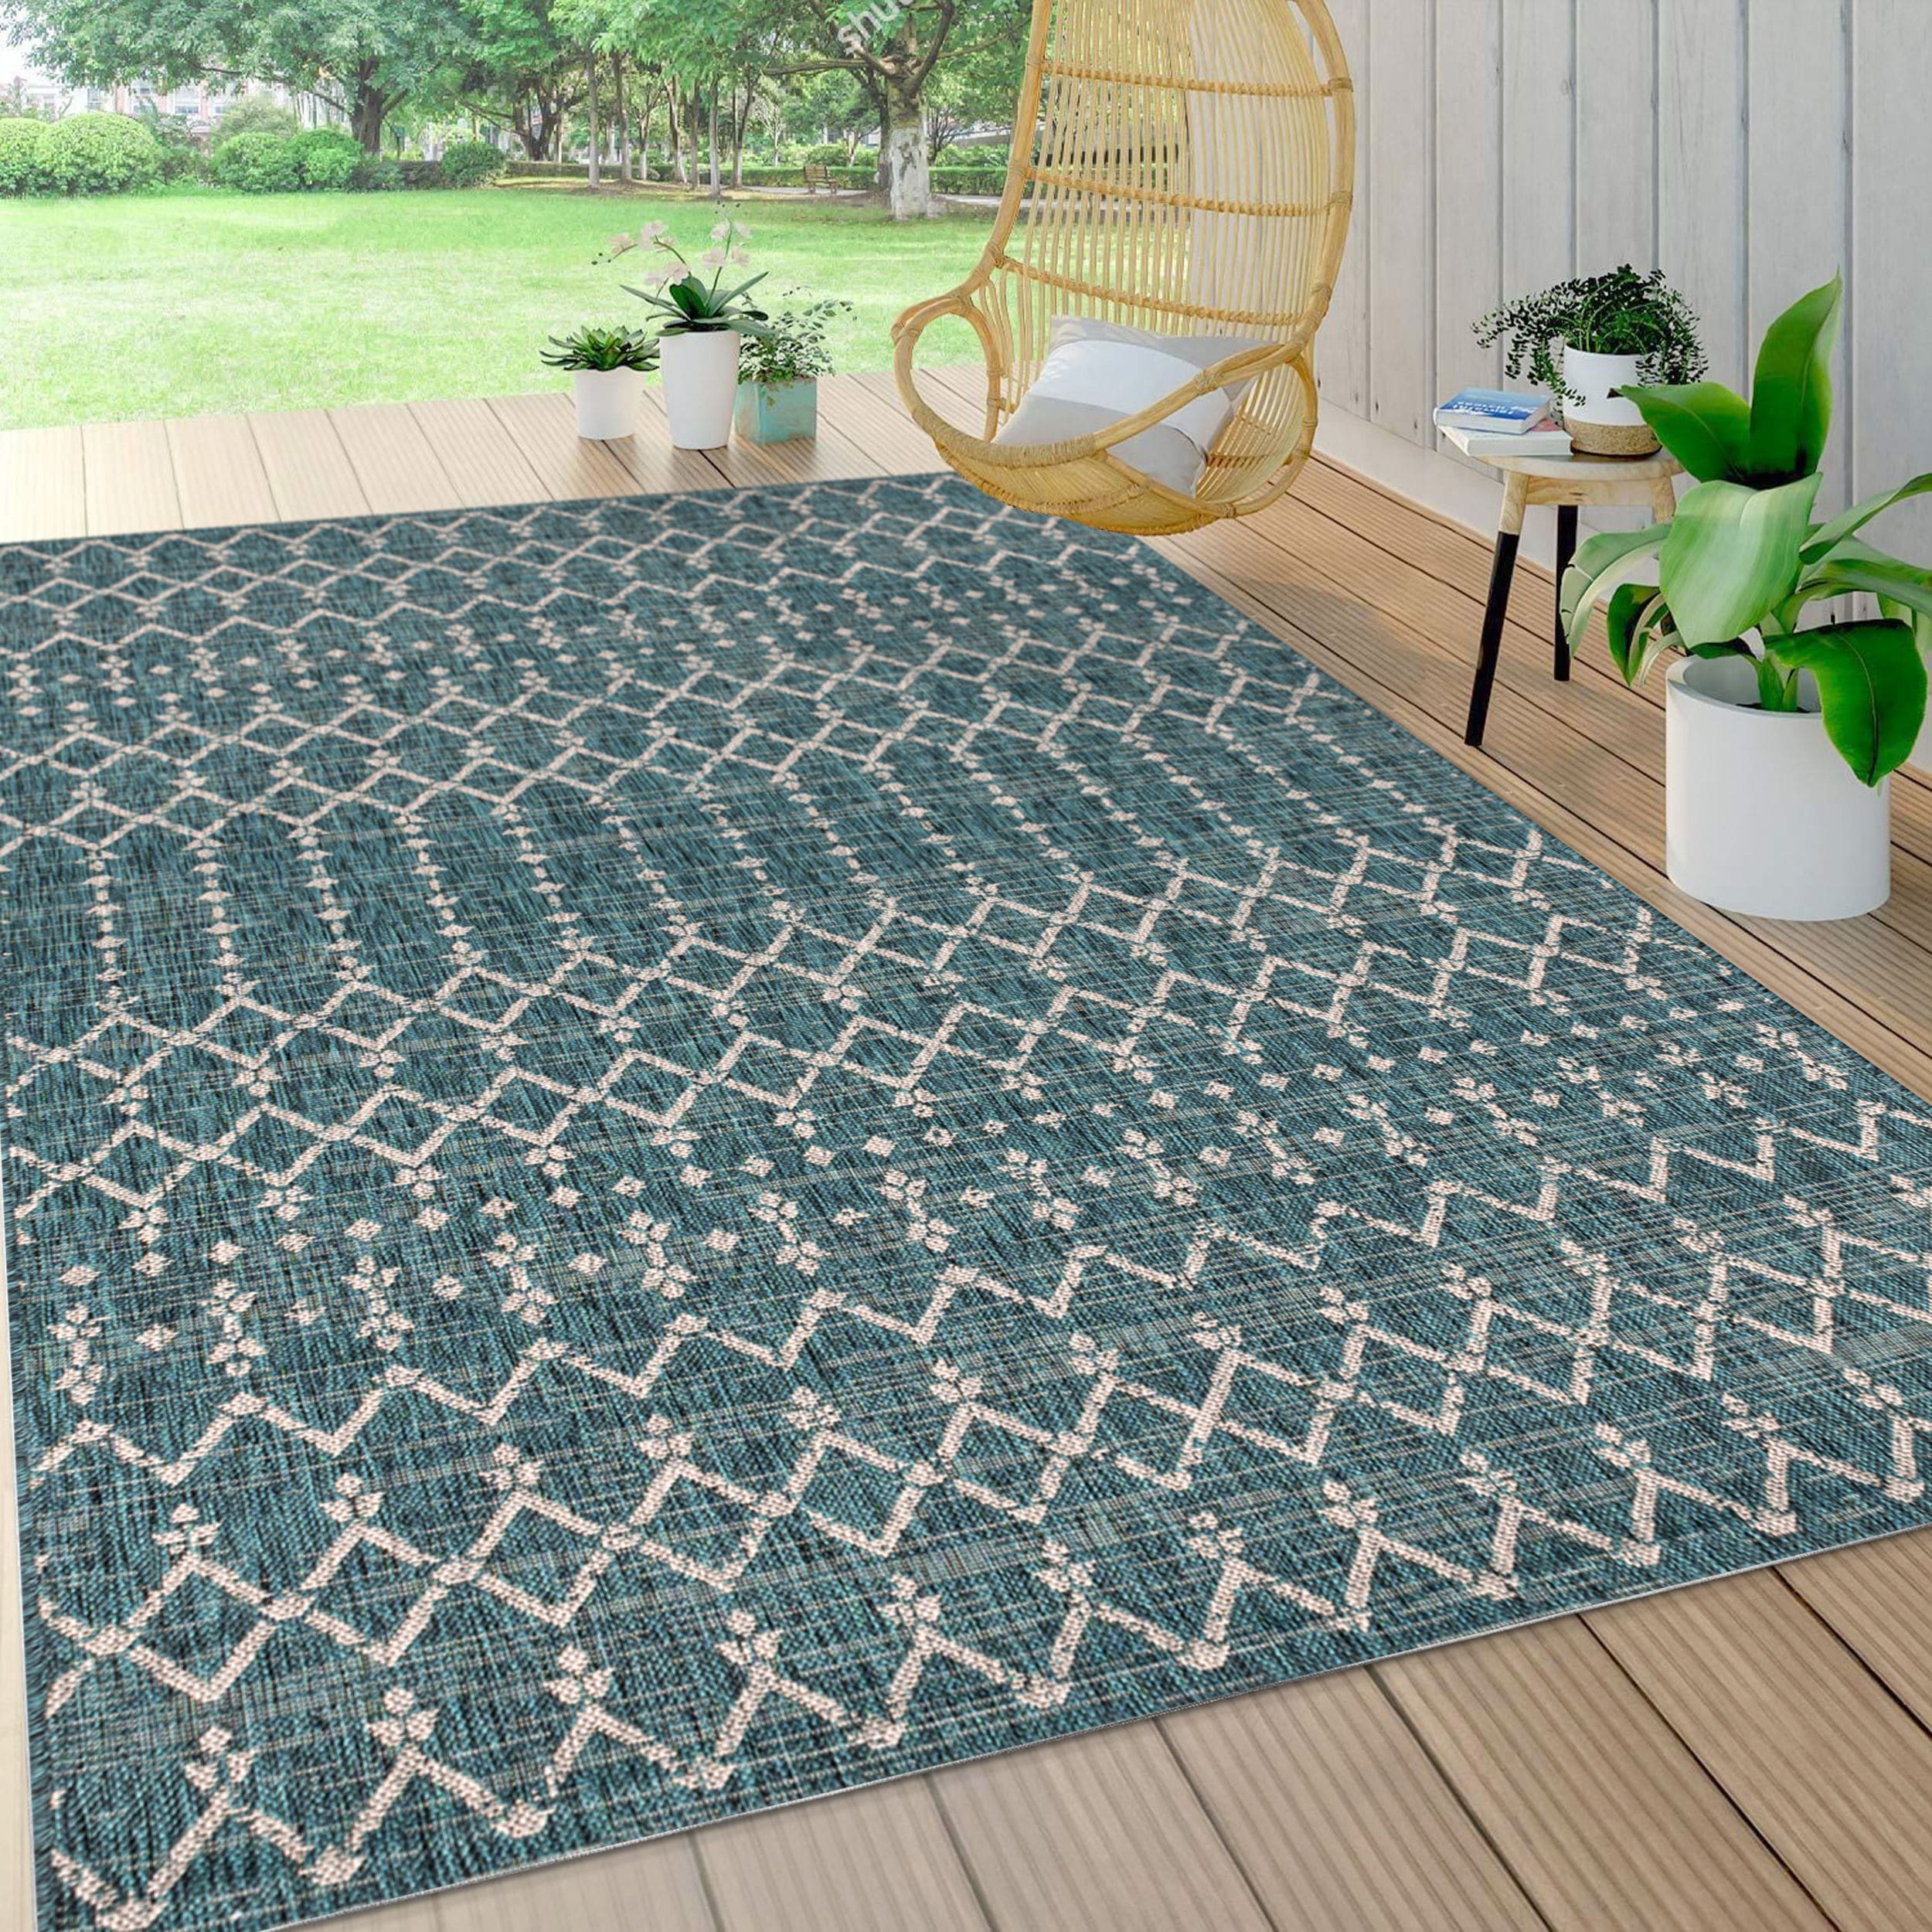 RUGS AREA RUGS 8x10 OUTDOOR RUGS INDOOR OUTDOOR CARPET LARGE KITCHEN PATIO RUGS 